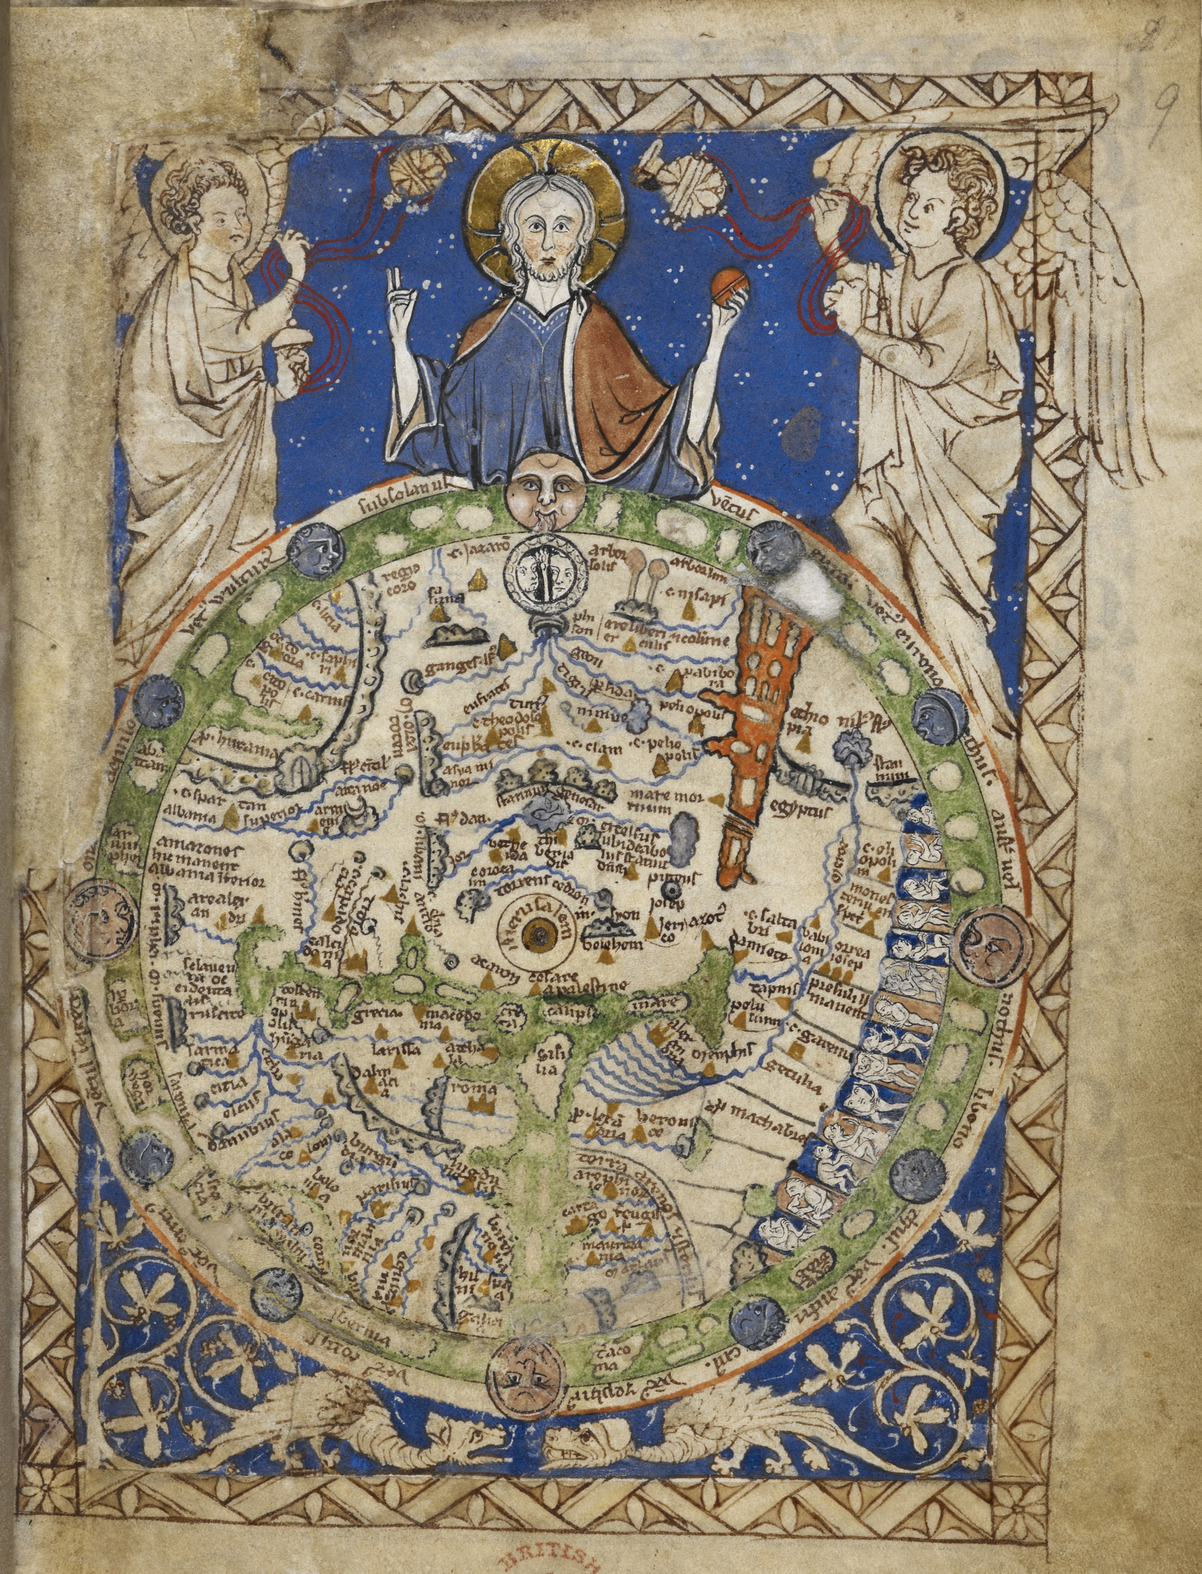 Psalter Map (Detail of orb), ca. 1275 (British Library, London). Photo: Public Domain.